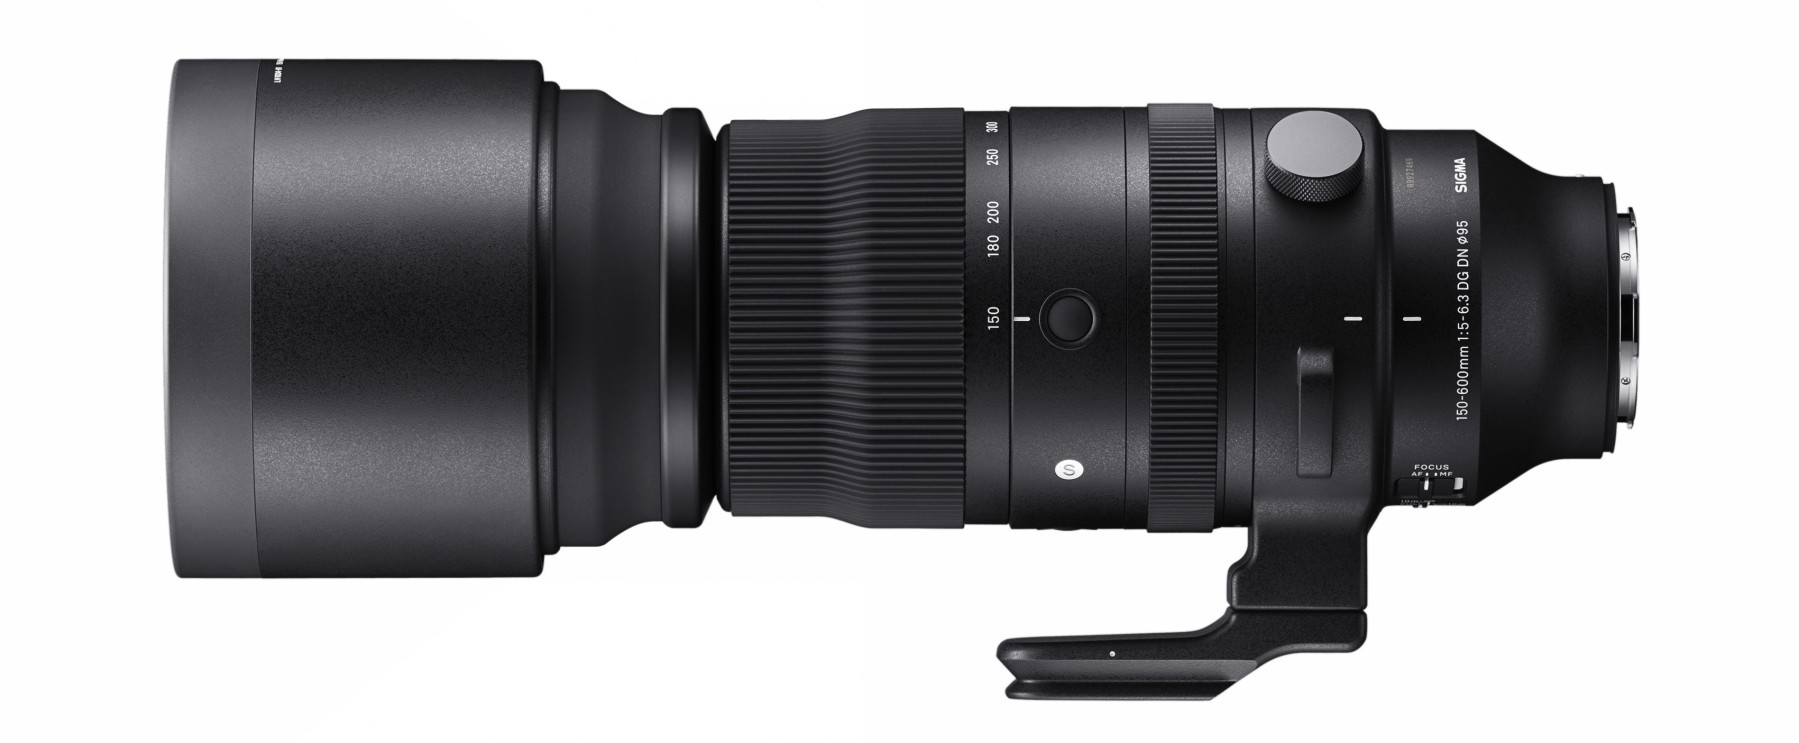 SIGMA 150-600mm F5-6.3 DG DN OS | Sports voor Sony E-Mount